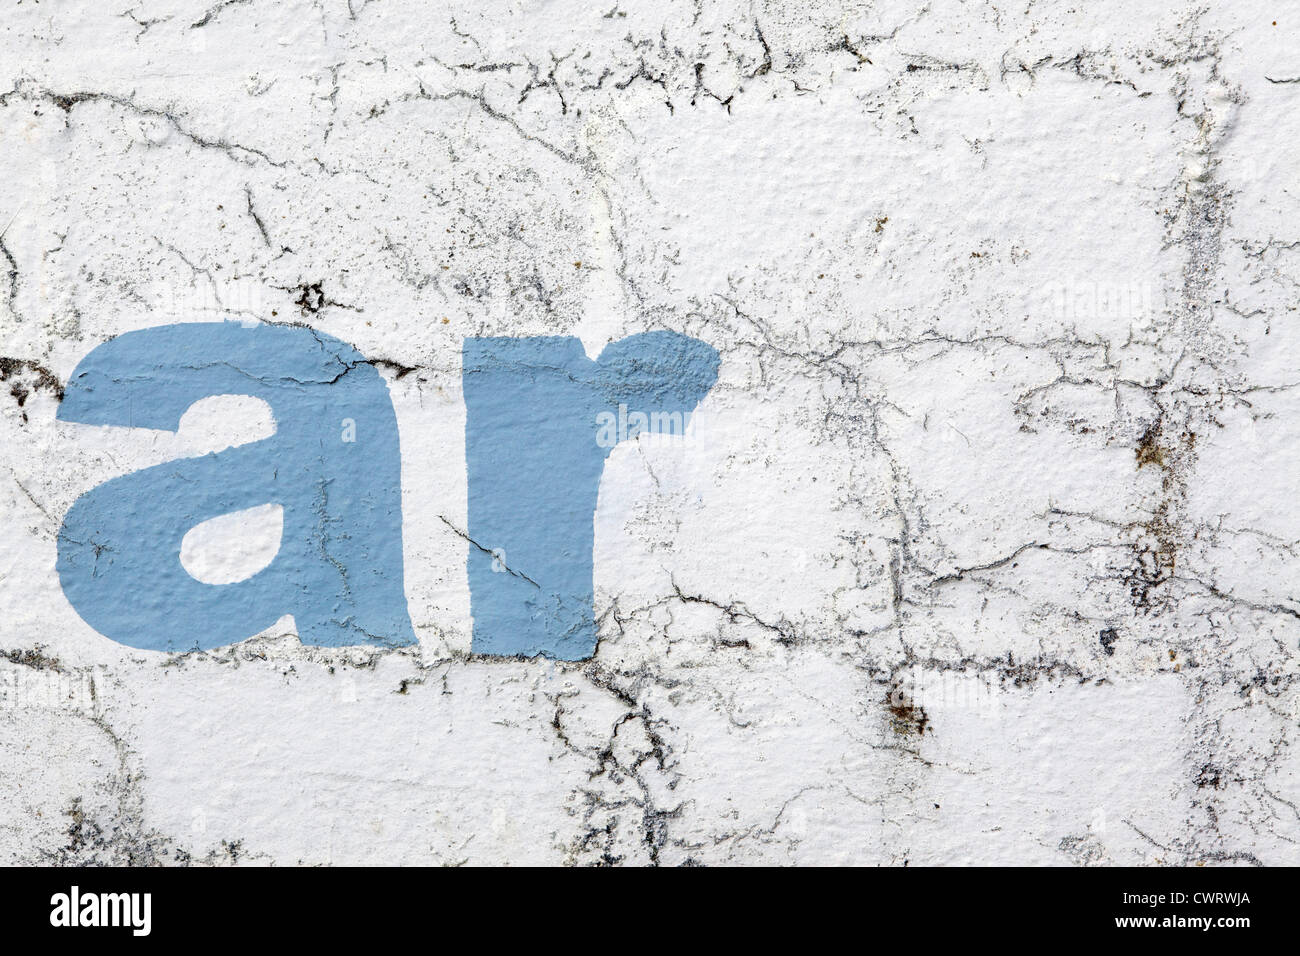 Lettering 'ar', stencil style sky blue paint on a white washed wall background, crumbling and distressed look, Cornwall, UK Stock Photo